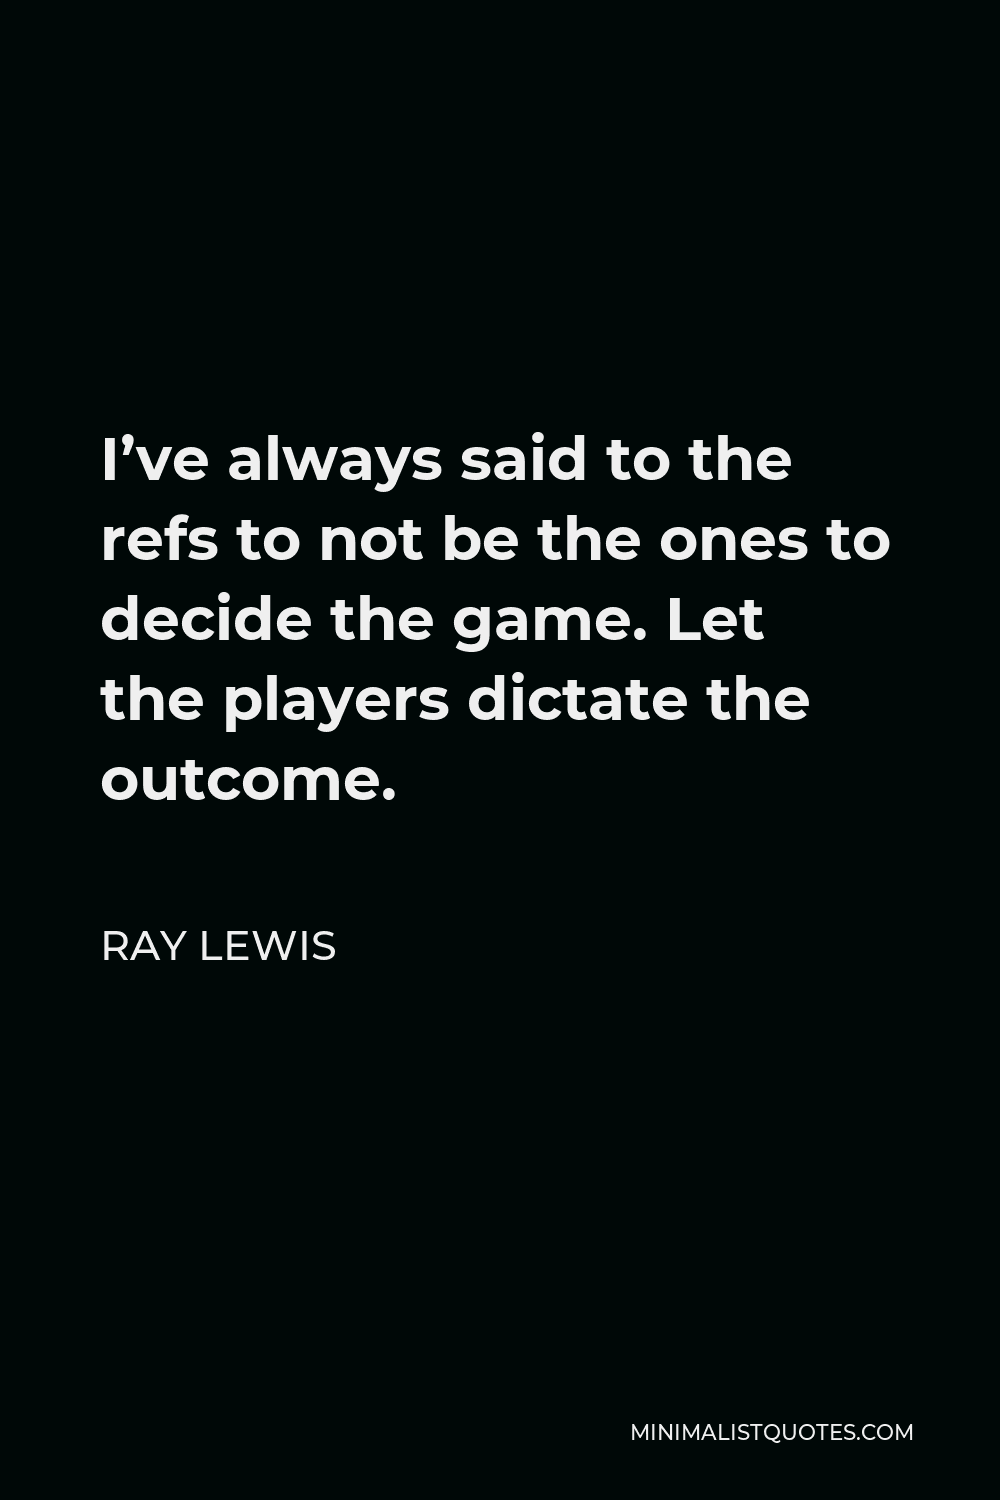 Ray Lewis Quote - I’ve always said to the refs to not be the ones to decide the game. Let the players dictate the outcome.